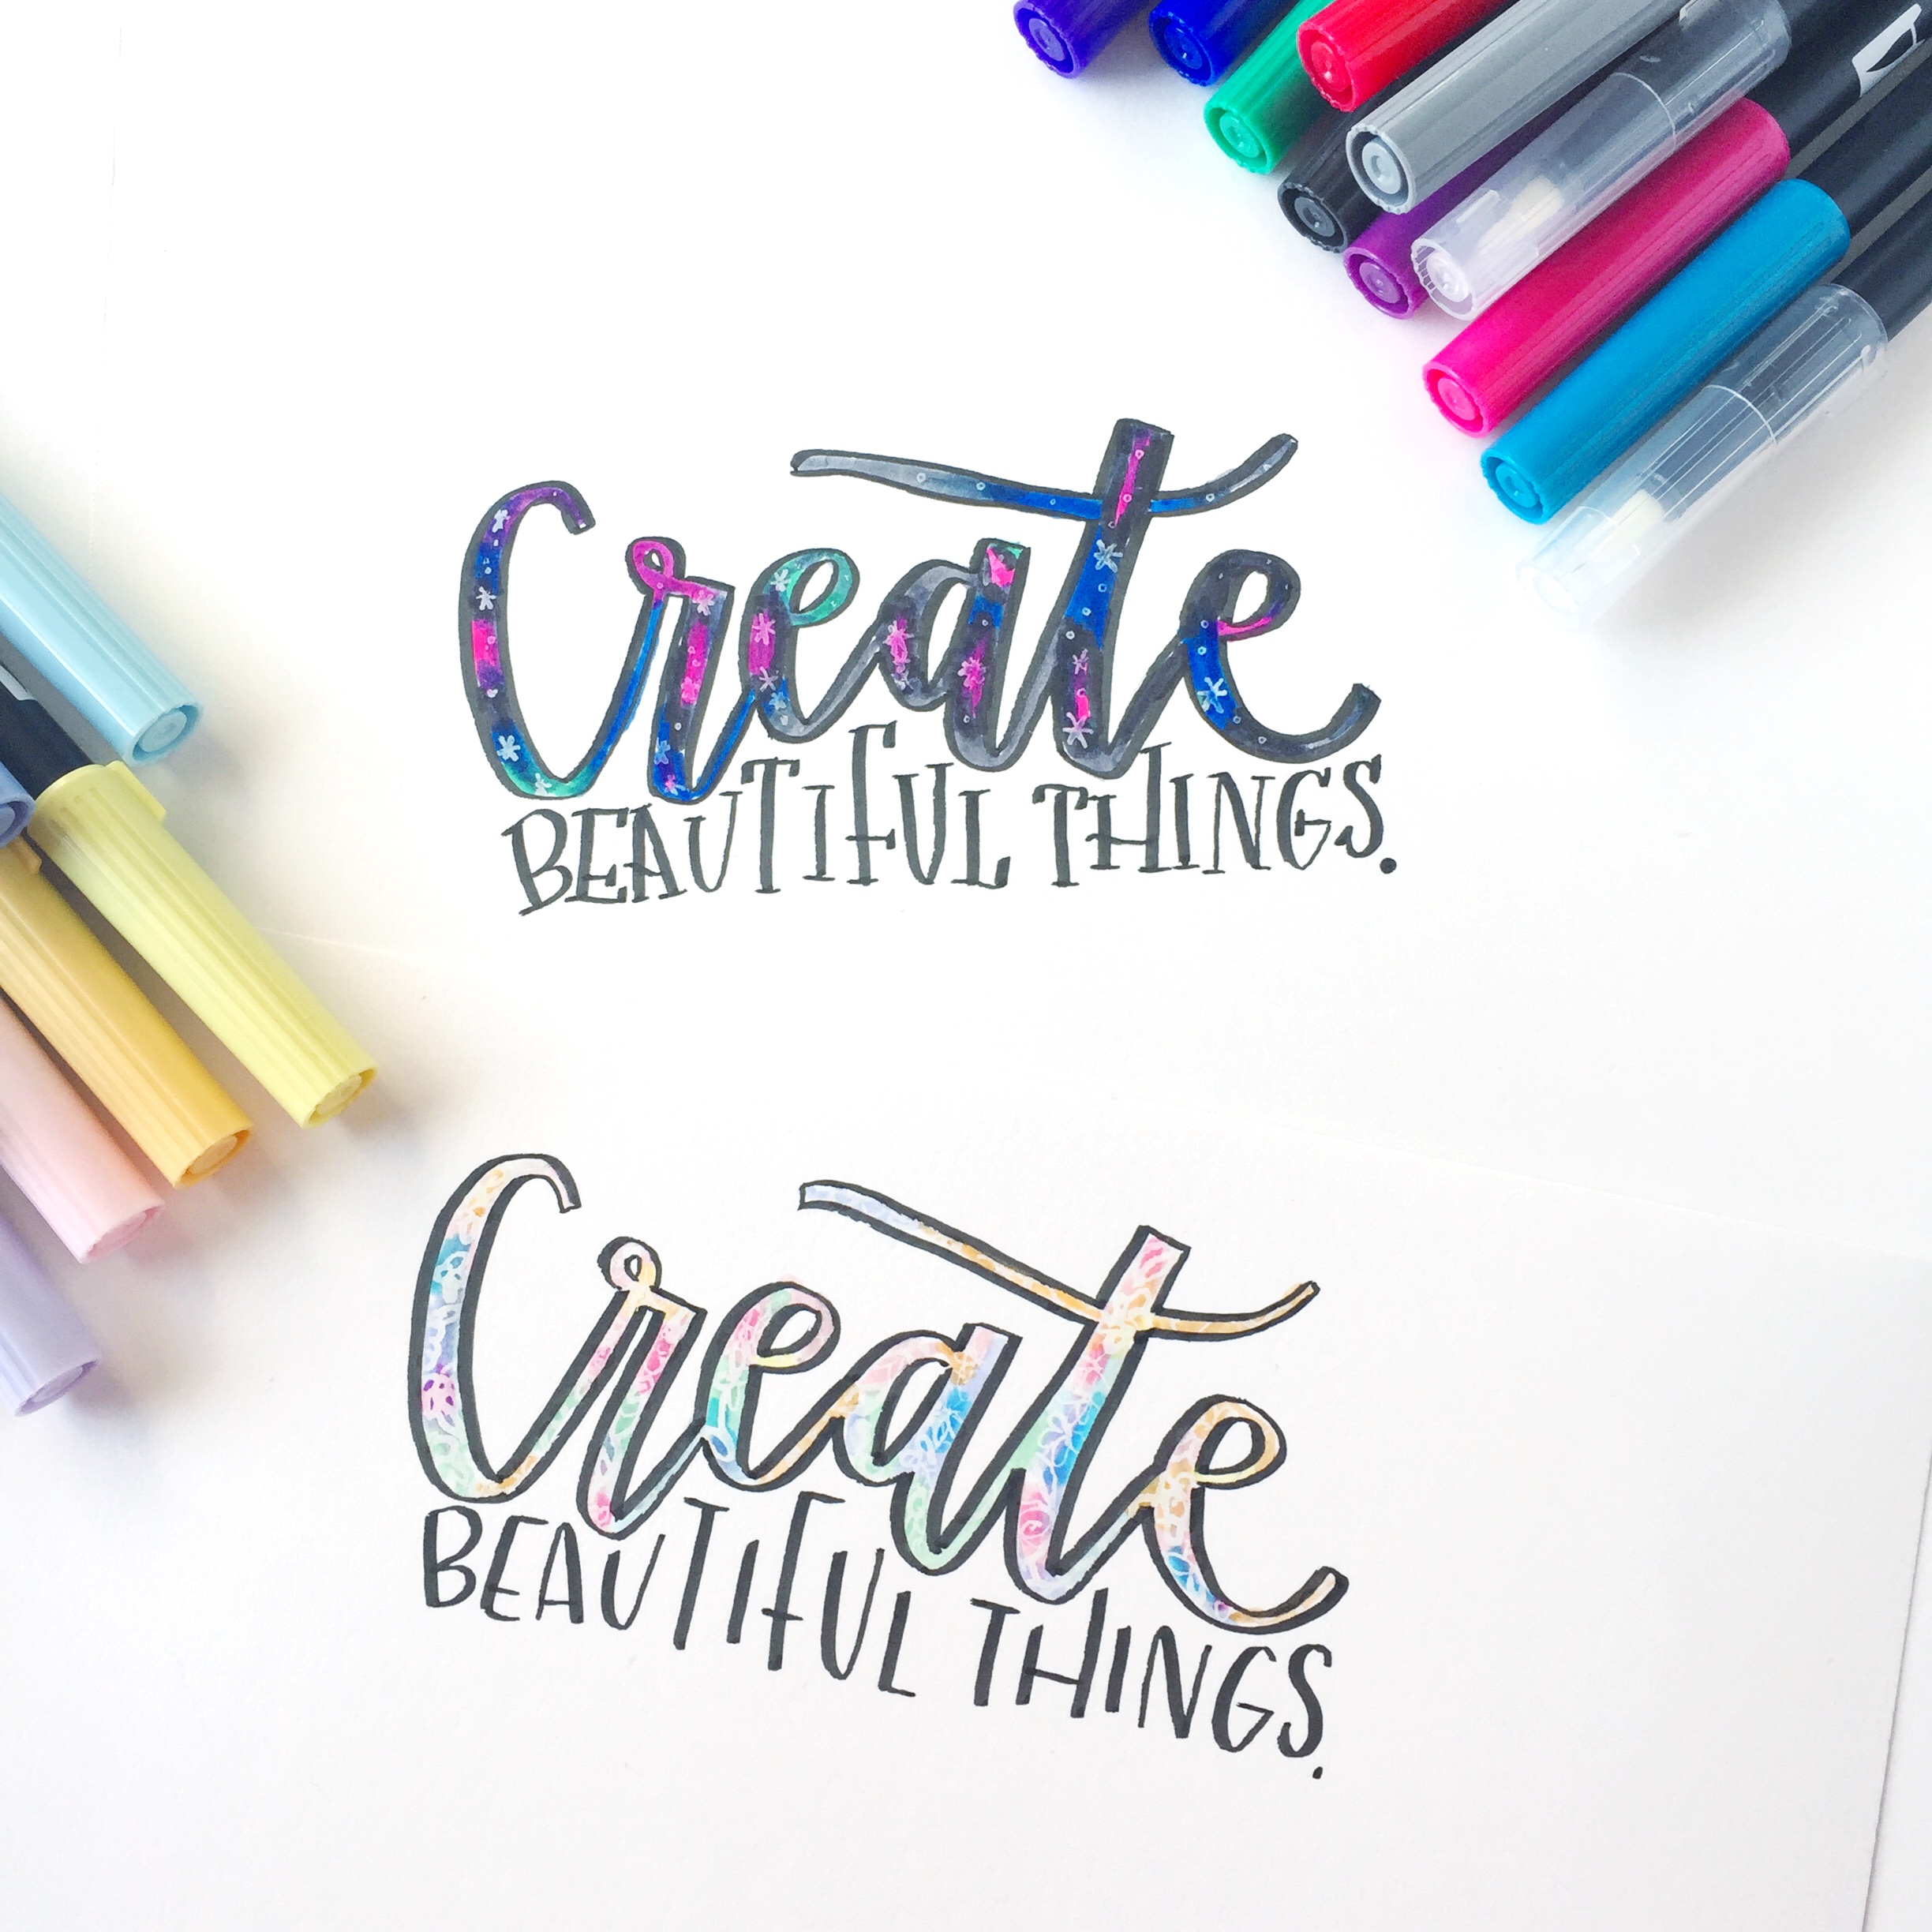 Lauren Fitzmaurice of @renmadcalligraphy gives you tips and tricks on how to create fun patterned lettering using the new Tombow Dual Brush Pen Galaxy and Pastel Palettes. For more tips and tricks, check out renmadecalligraphy.com.